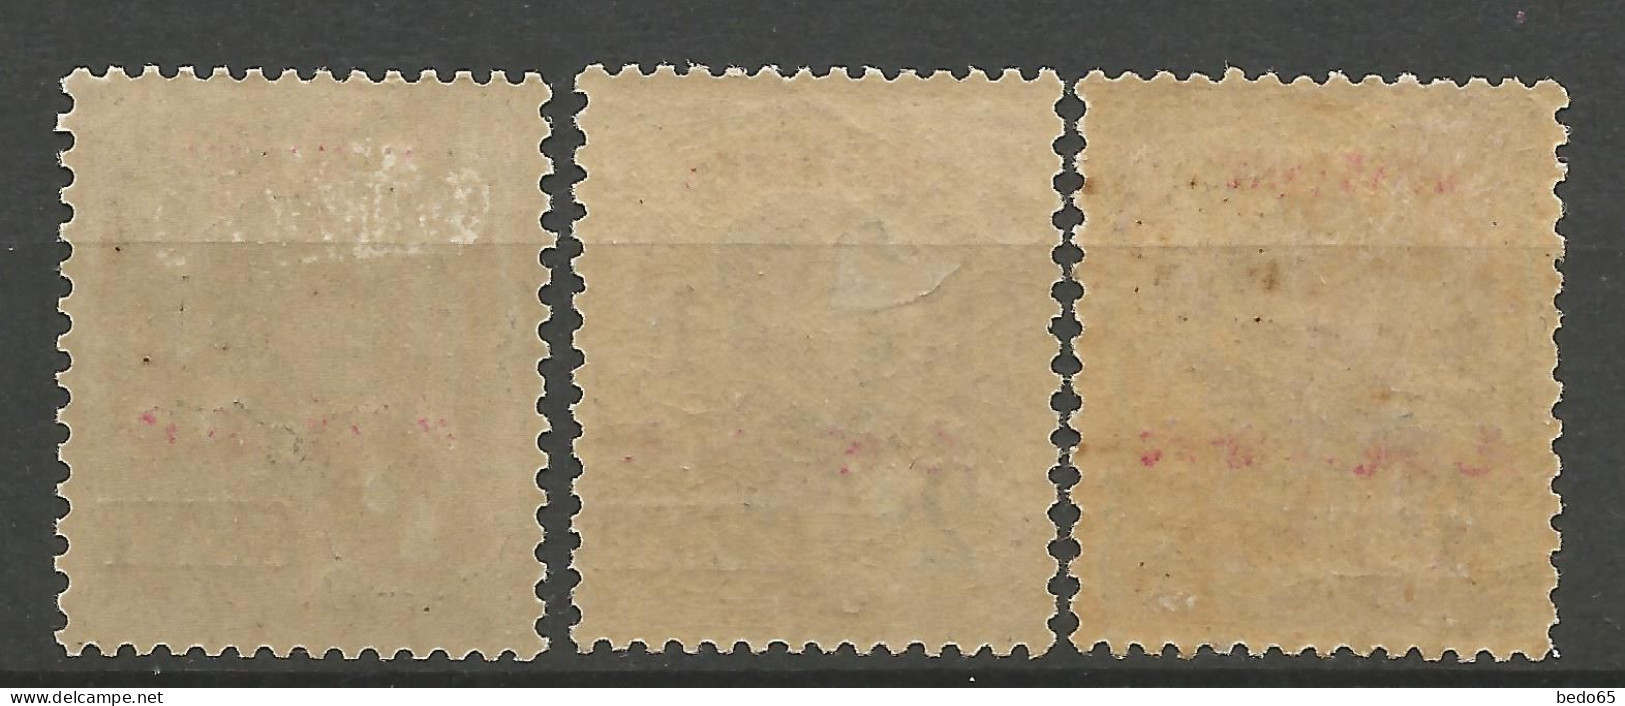 MONG-TZEU N° 51 / 58 / 53 Gom Coloniale  NEUF* TRACE DE CHARNIERE  / Hinge / MH - Unused Stamps